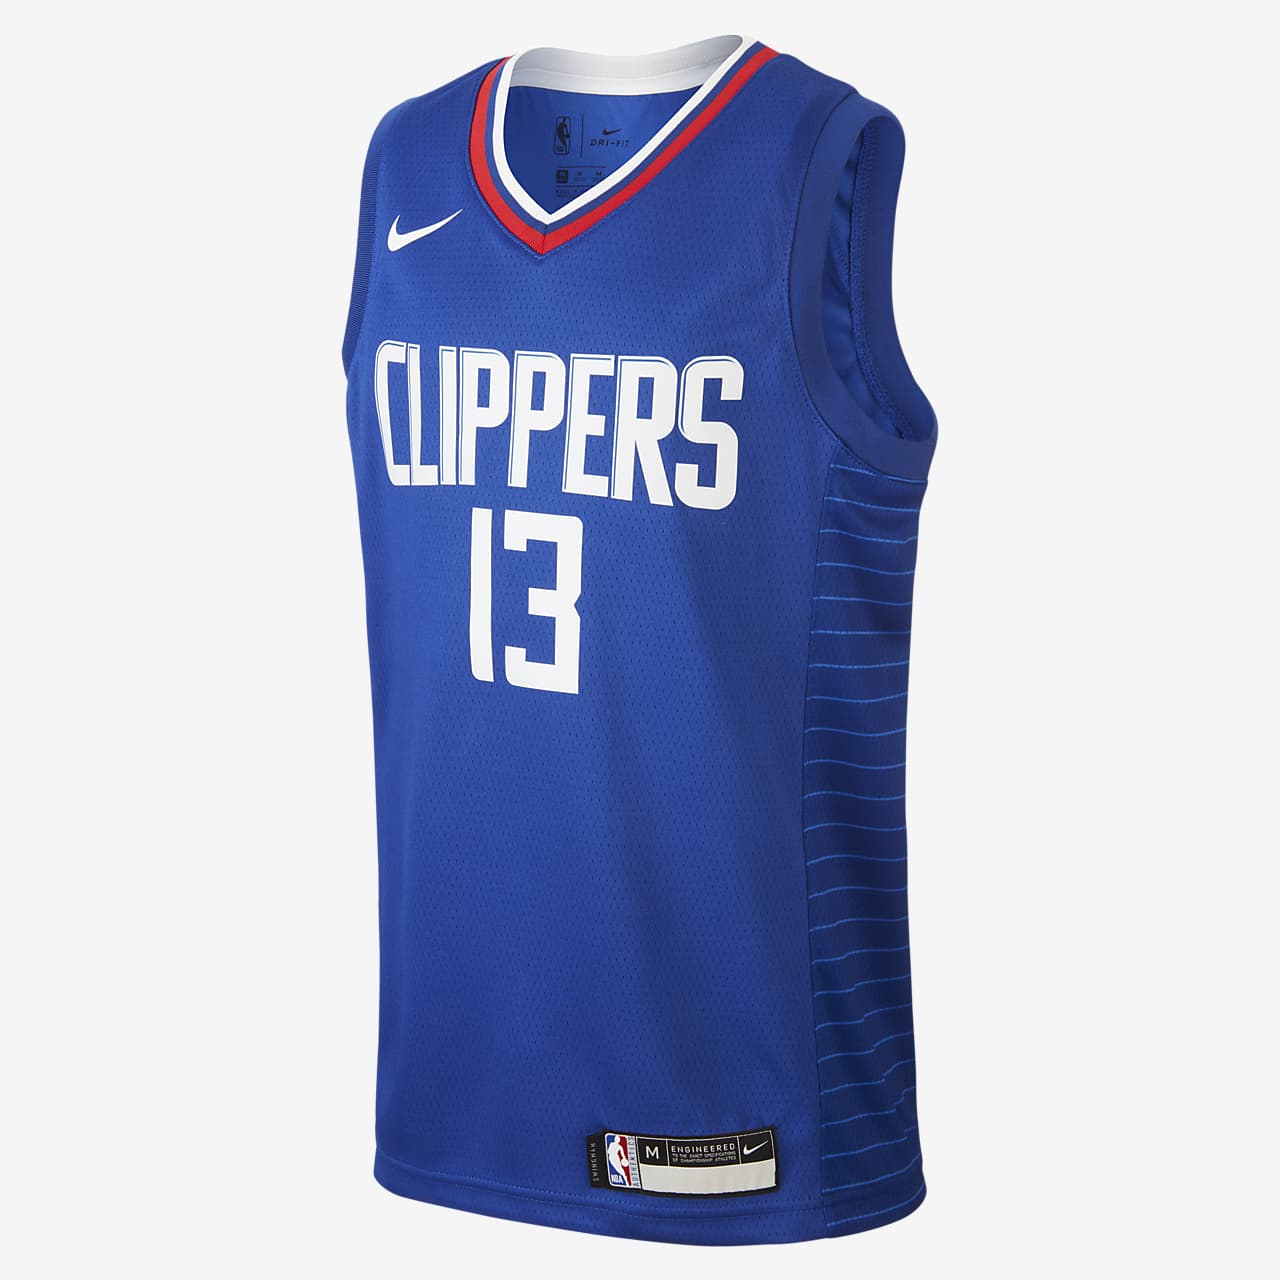 paul george in clippers jersey